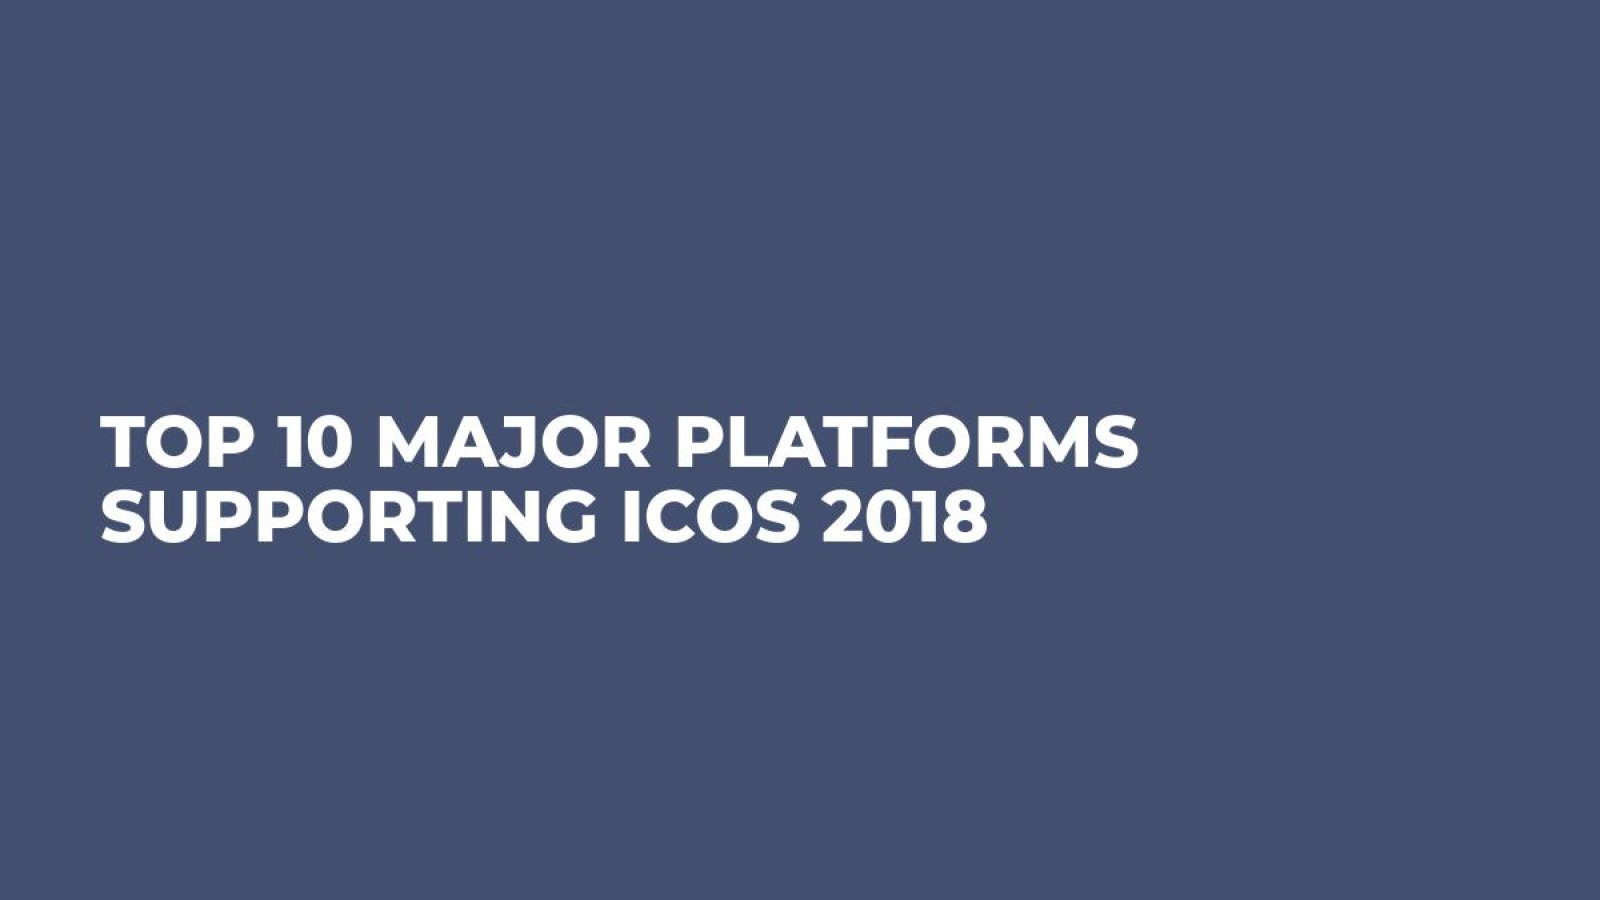 Top 10 Major Platforms Supporting ICOs 2018